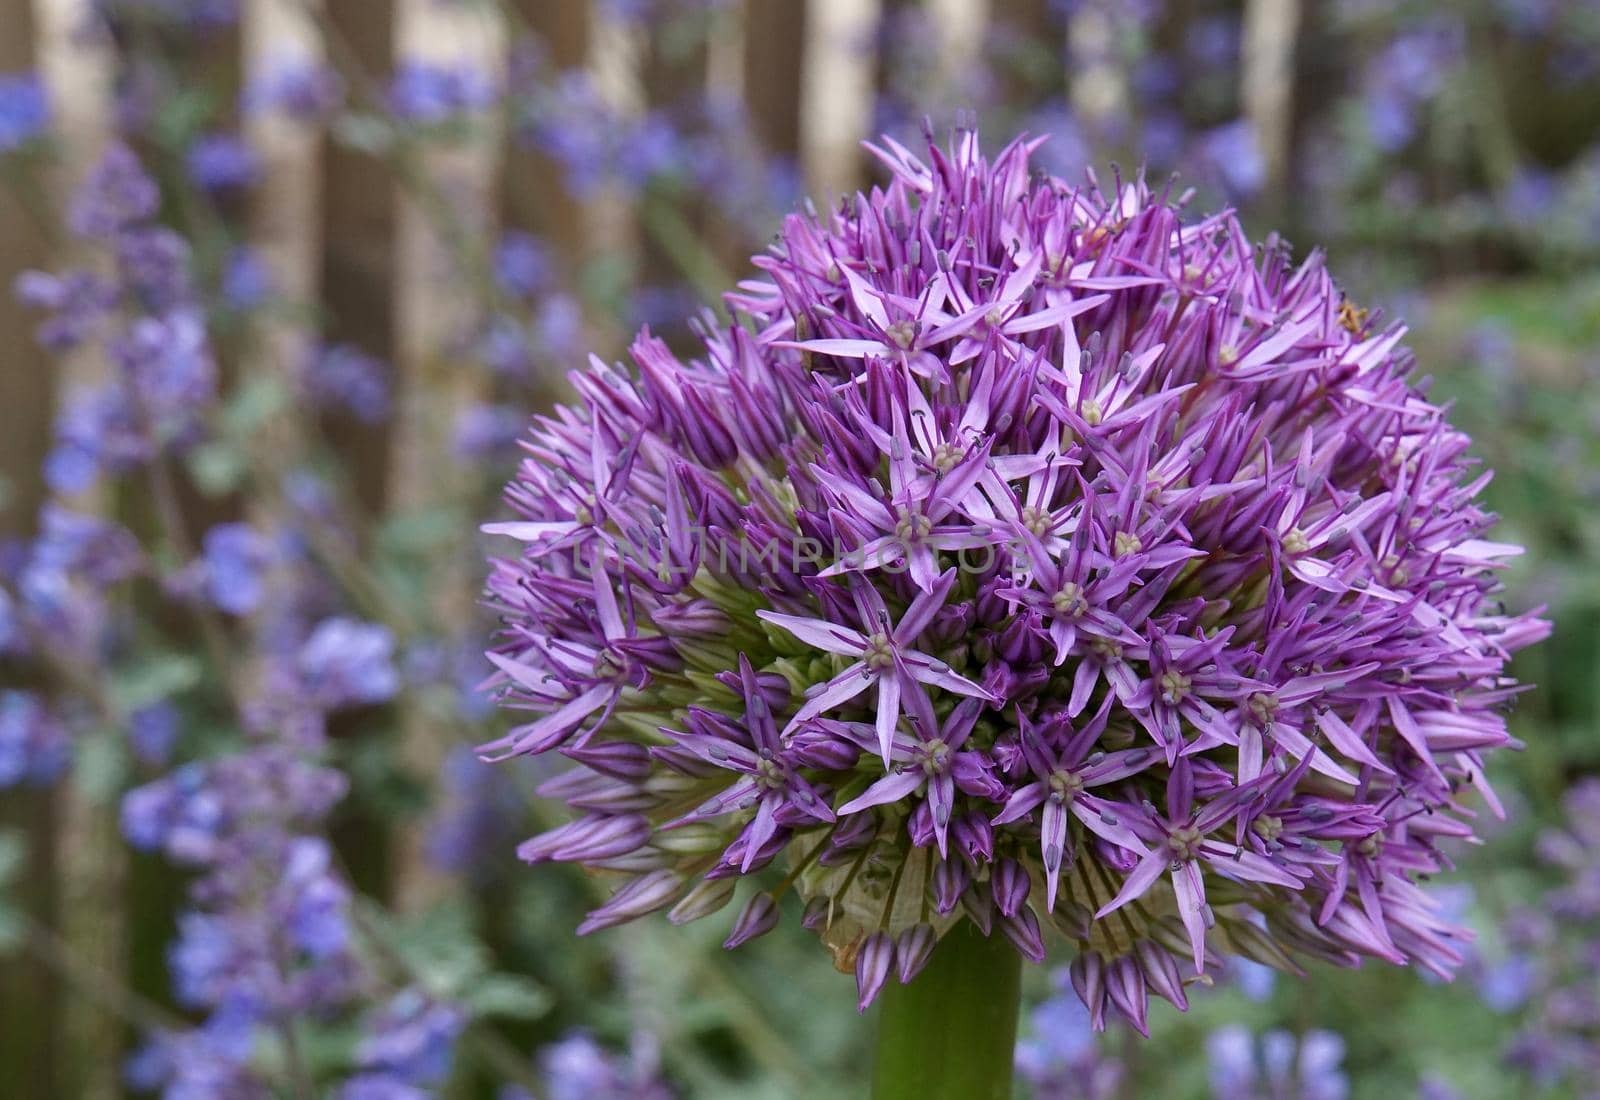 Allium Aflatunense Purple Sensation with a fence and blue flowers in the background